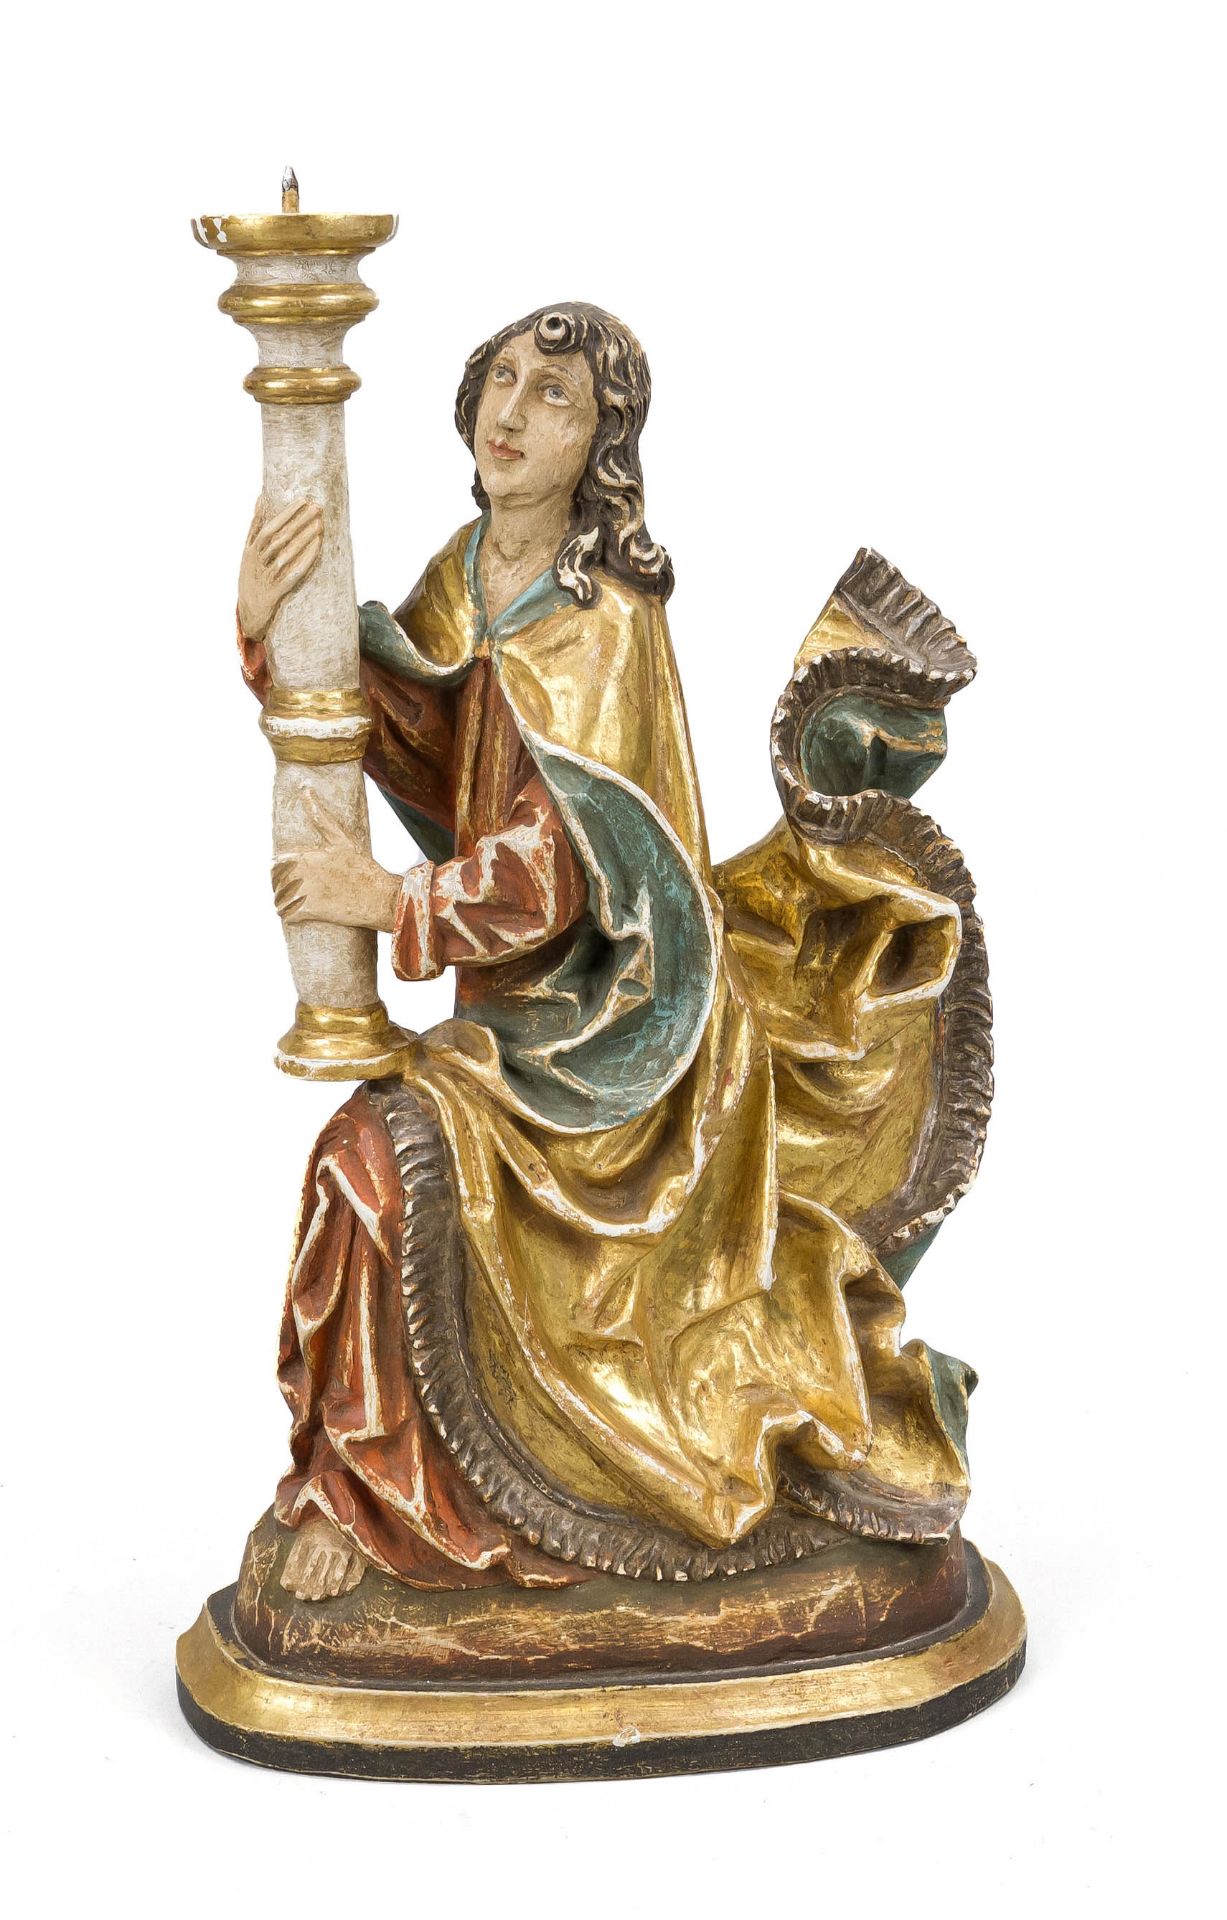 Figural candlestick, 20th century, carved wood and polychrome painted, seated figure in medieval